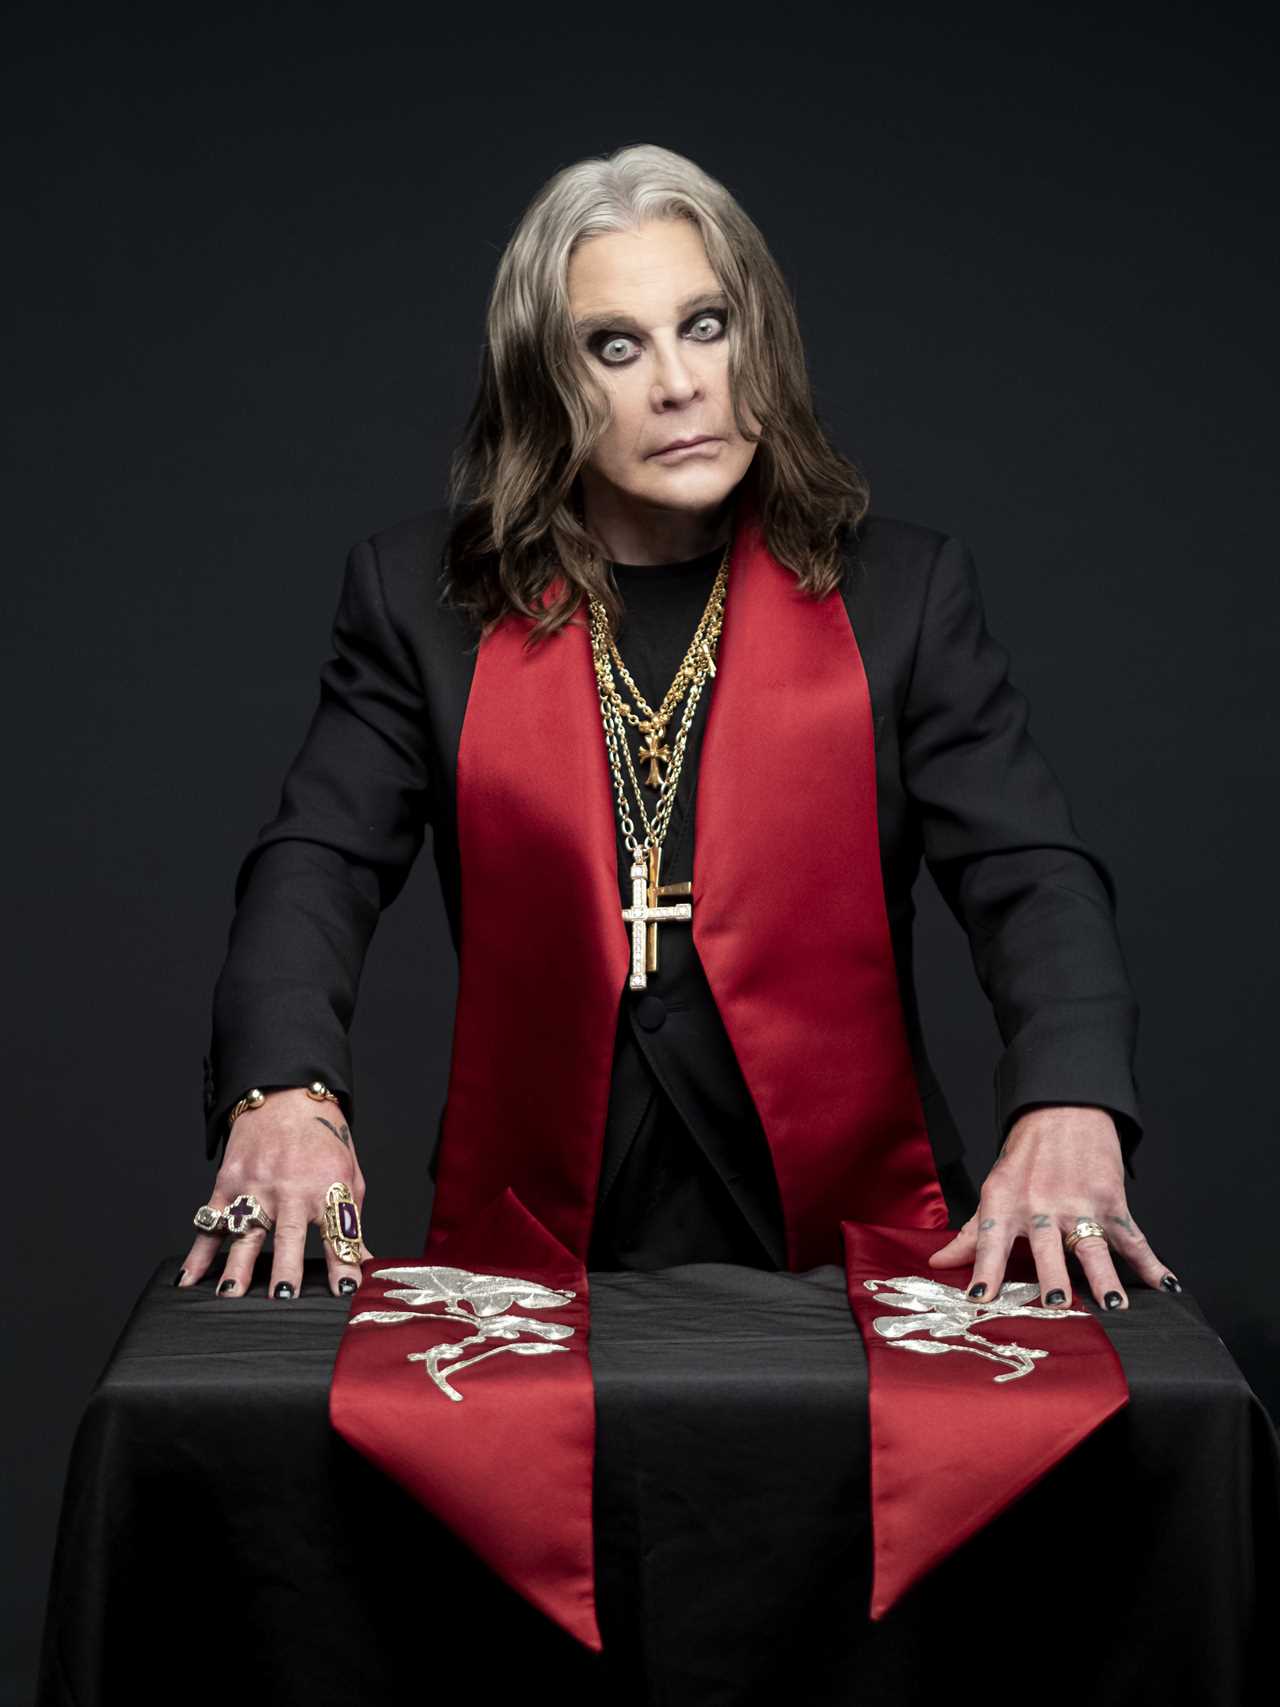 Ozzy Osbourne Opens Up About Collaborations and His Upcoming Solo Album